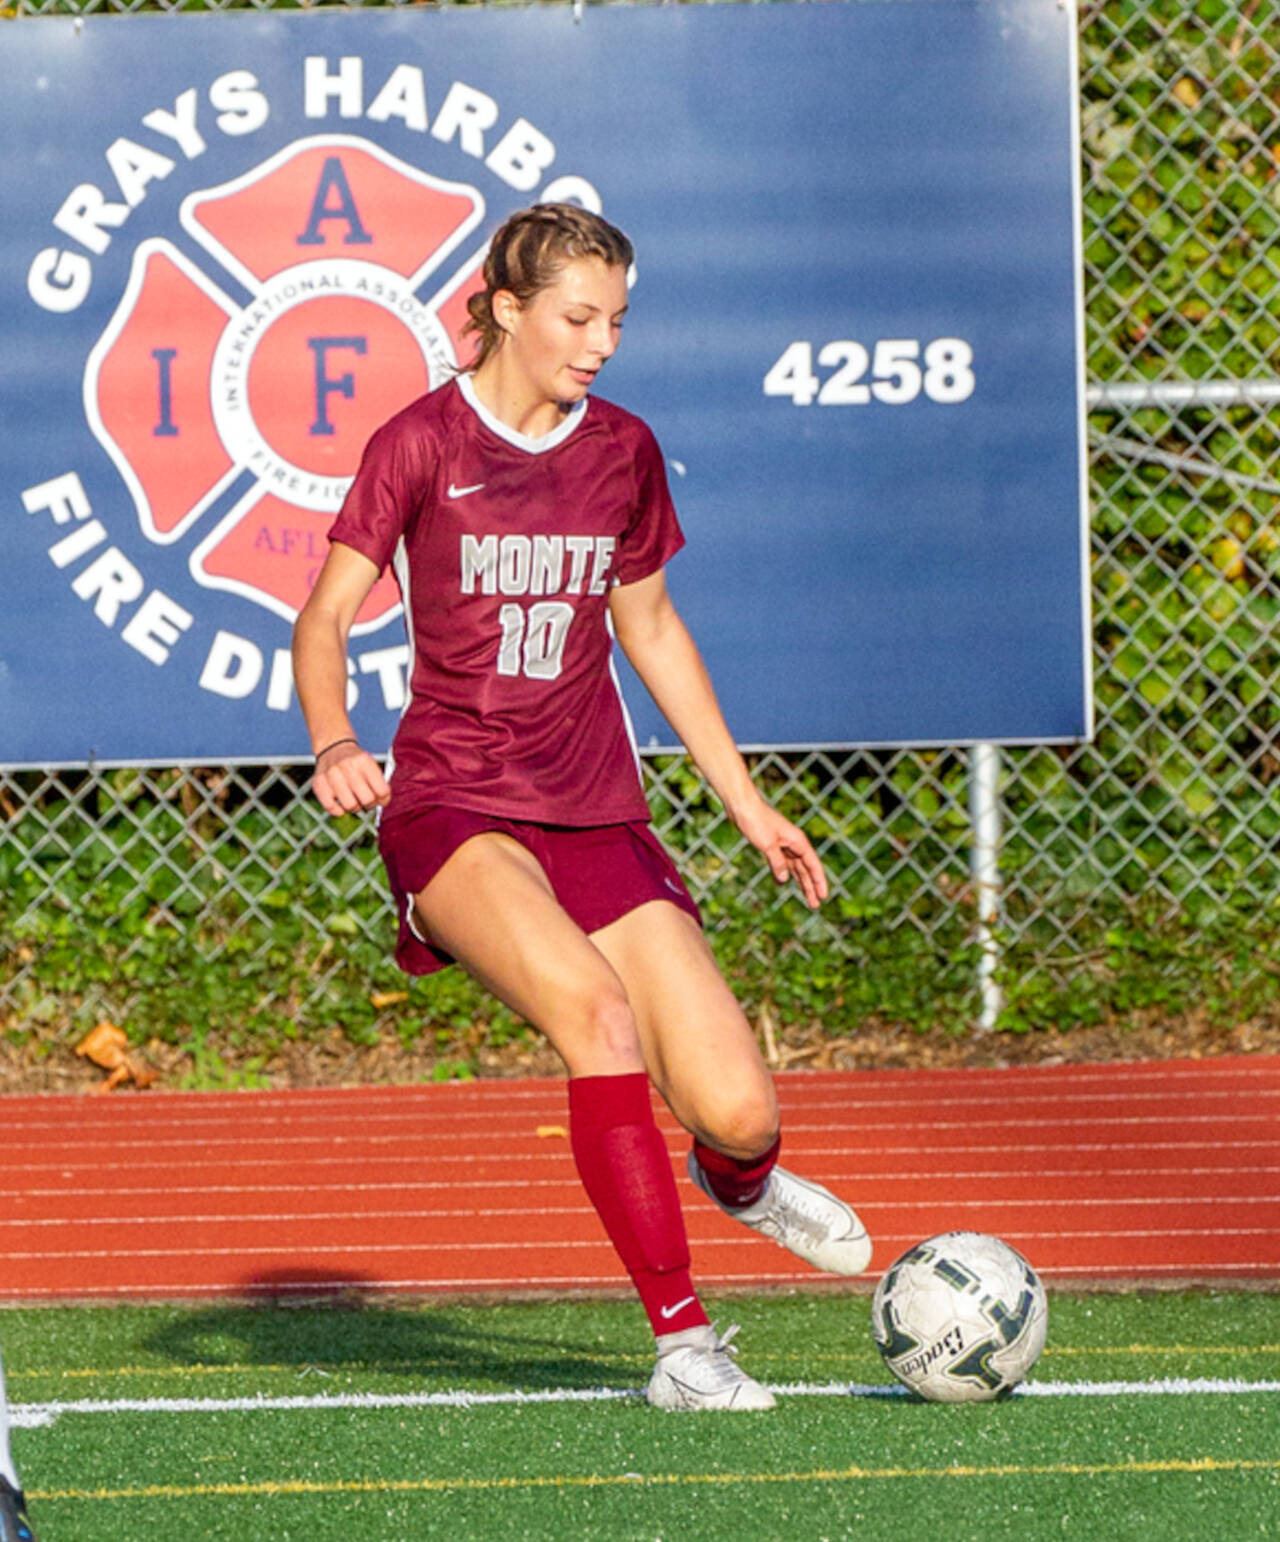 PHOTO BY SHAWN DONNELLY Montesano midfielder Mikayla Stanfield, seen here in a file photo, recorded her third hat trick in four games with a victory over Eatonville Cruisers on Tuesday in Eatonville.